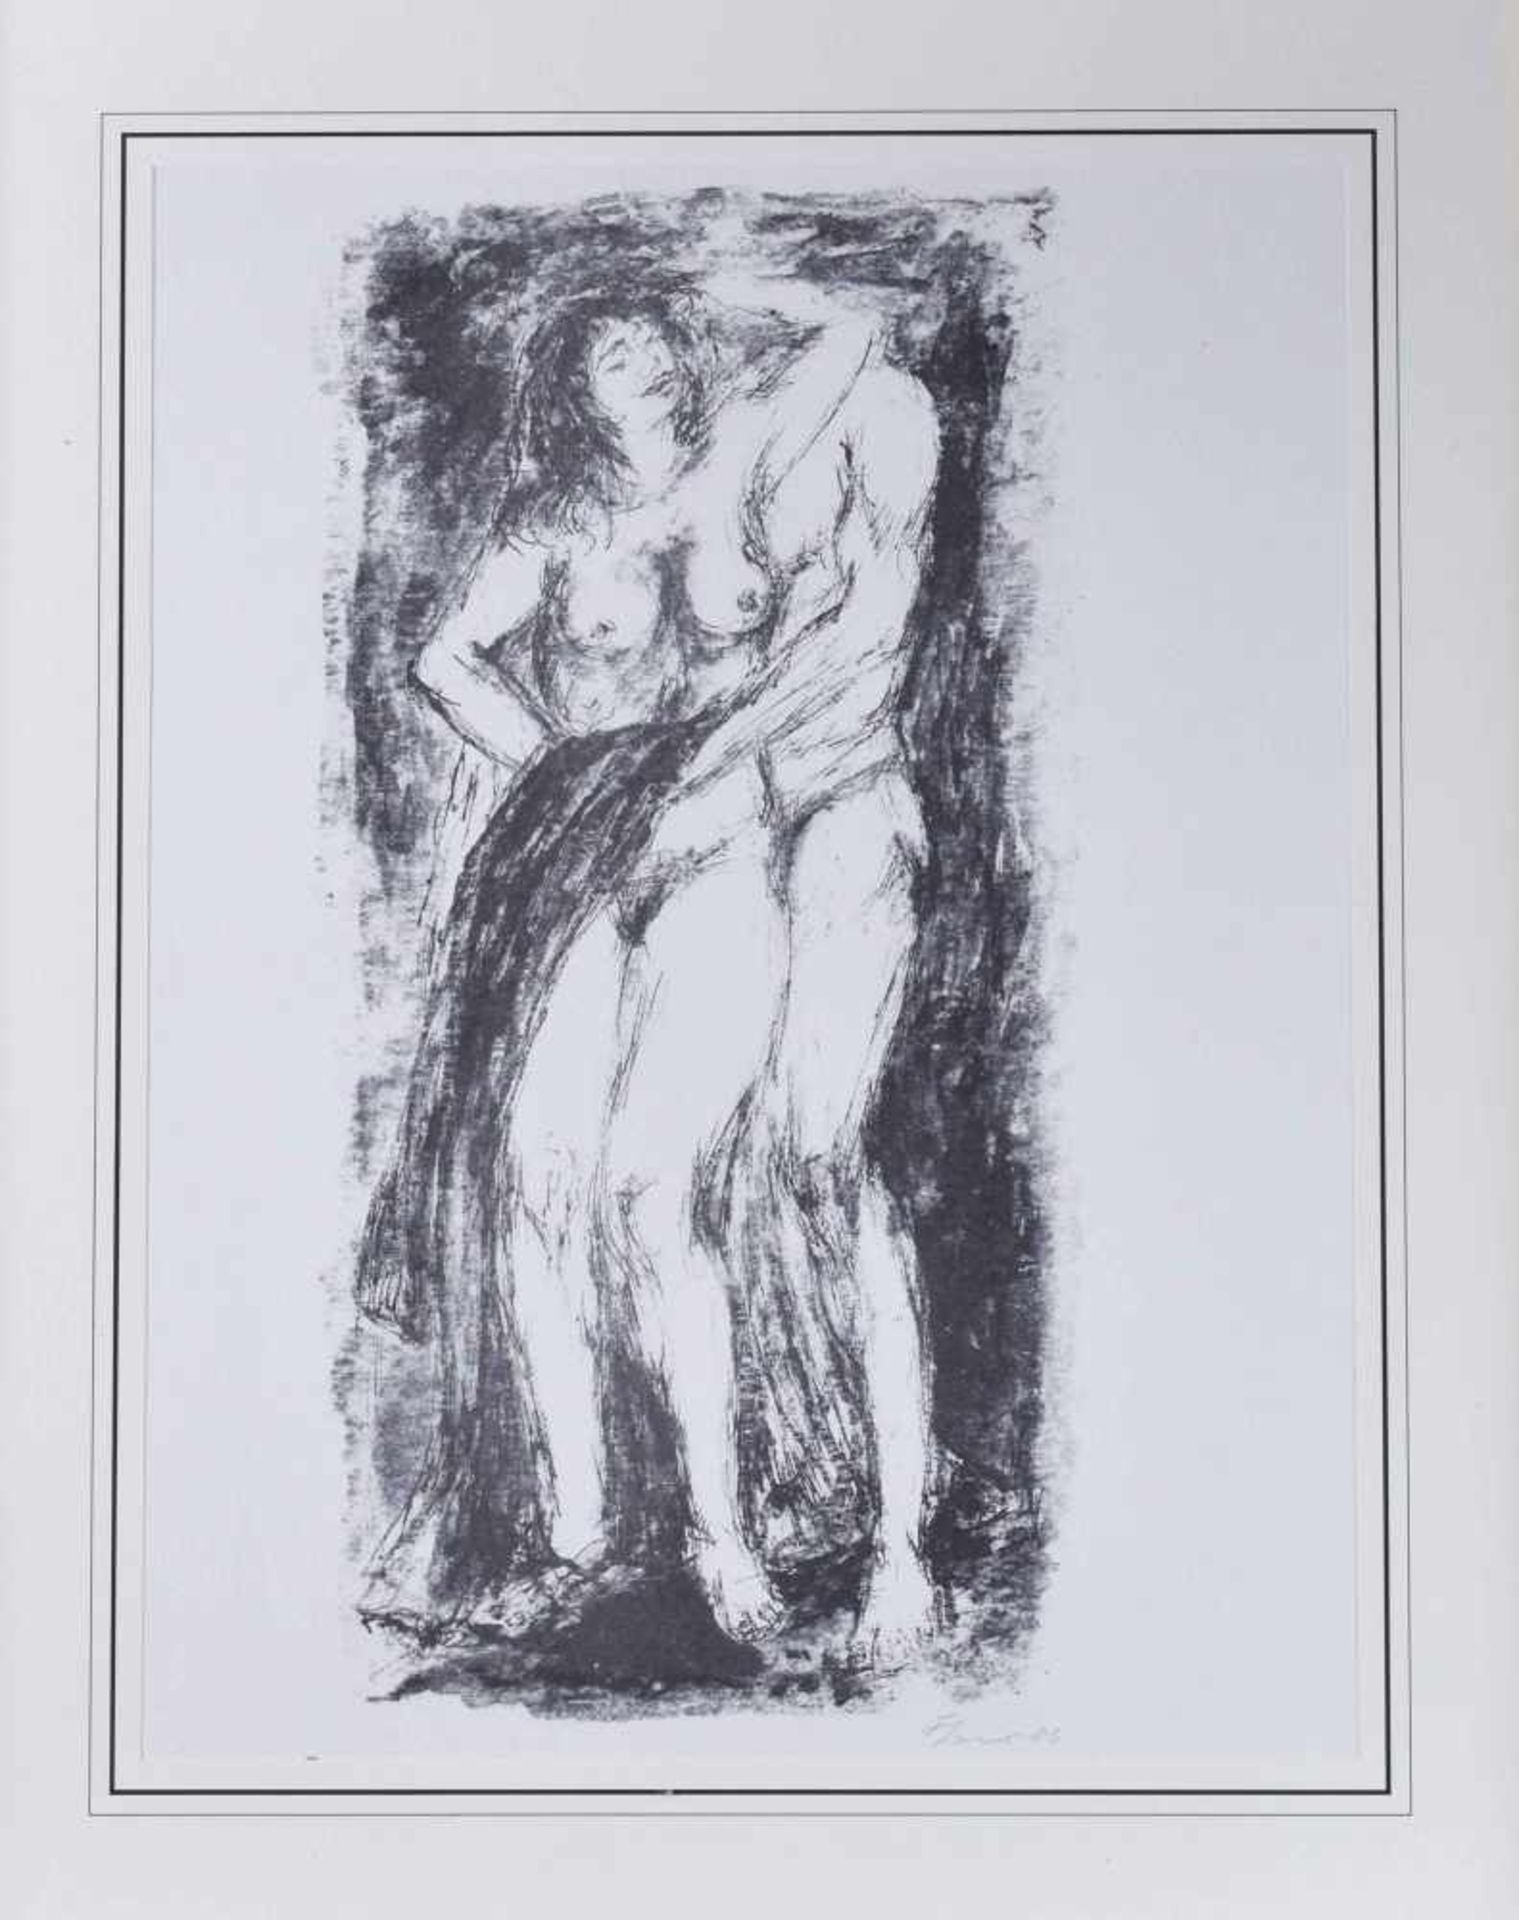 Fritz CREMER (1906-1993)"Pair of lovers"graphic lithography, visual size: 39.5 cm x 29.5 cm,hand